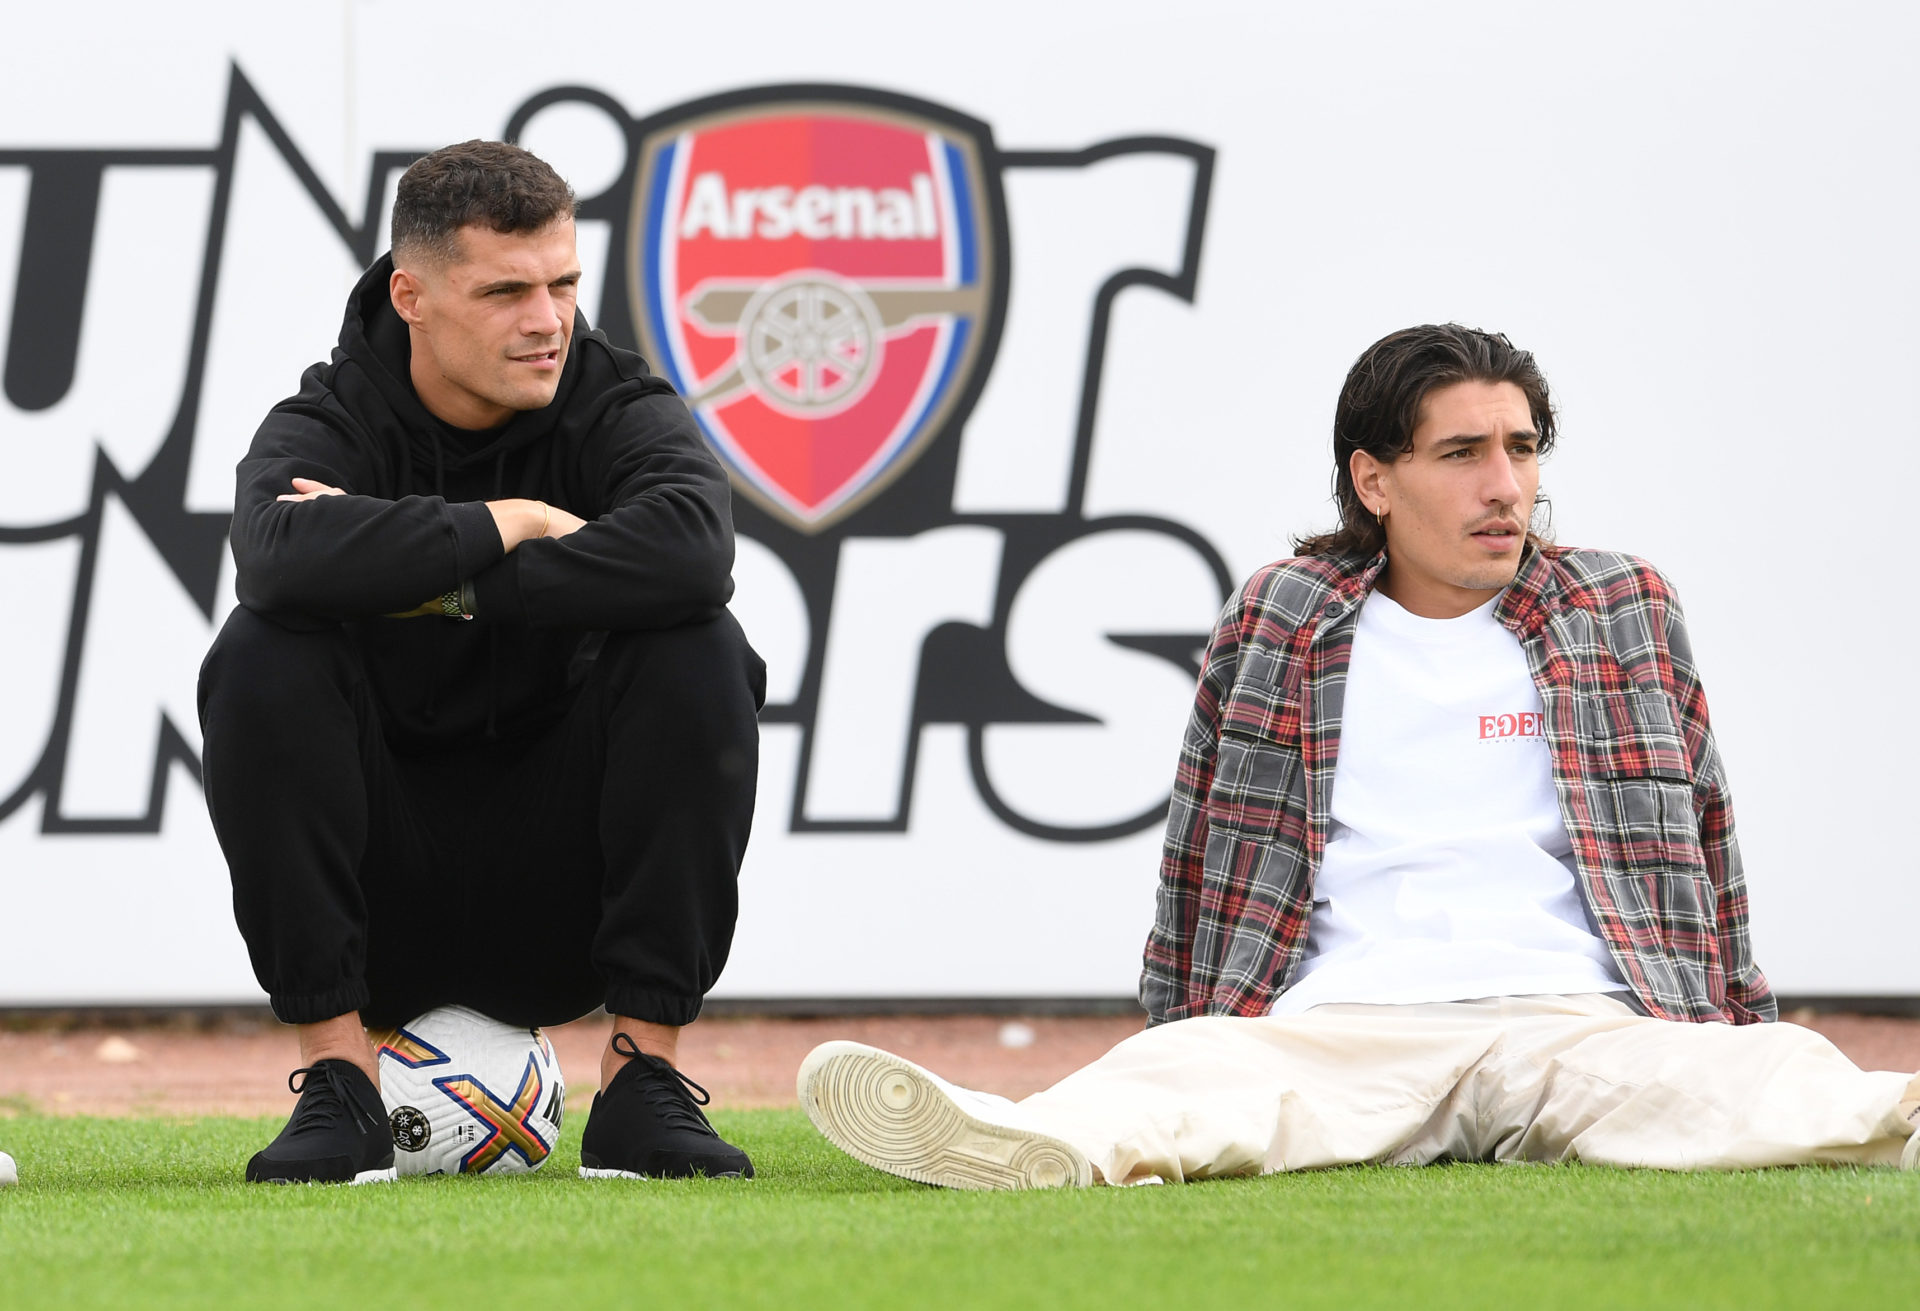 SoccerBible on X: Hector Bellerin has sorted Arsenal out with a